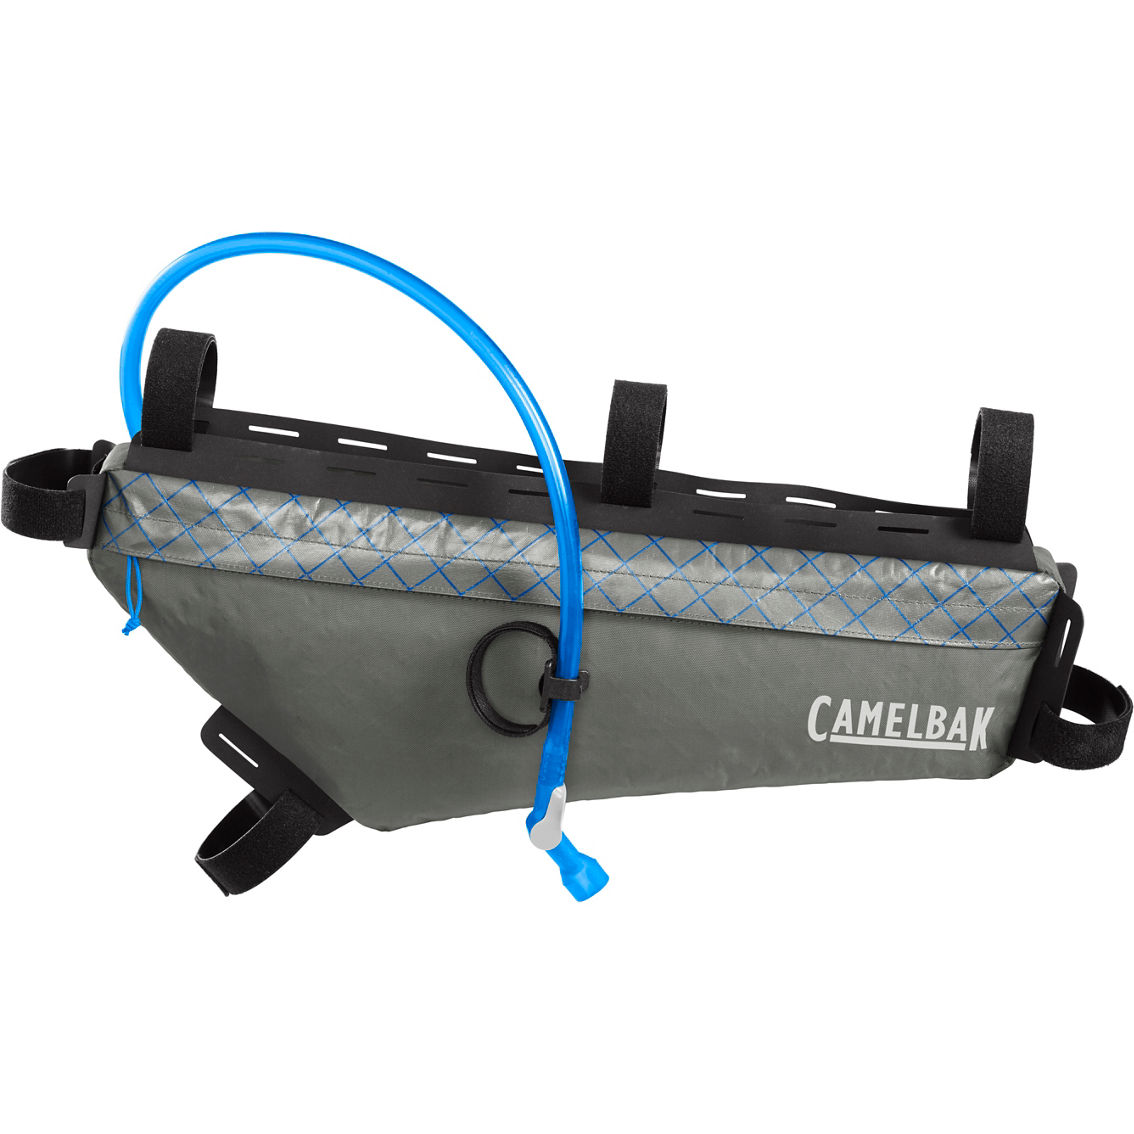 Camelbak M.U.L.E. Frame Pack with Quick Stow 2L Bike Reservoir - Image 3 of 8